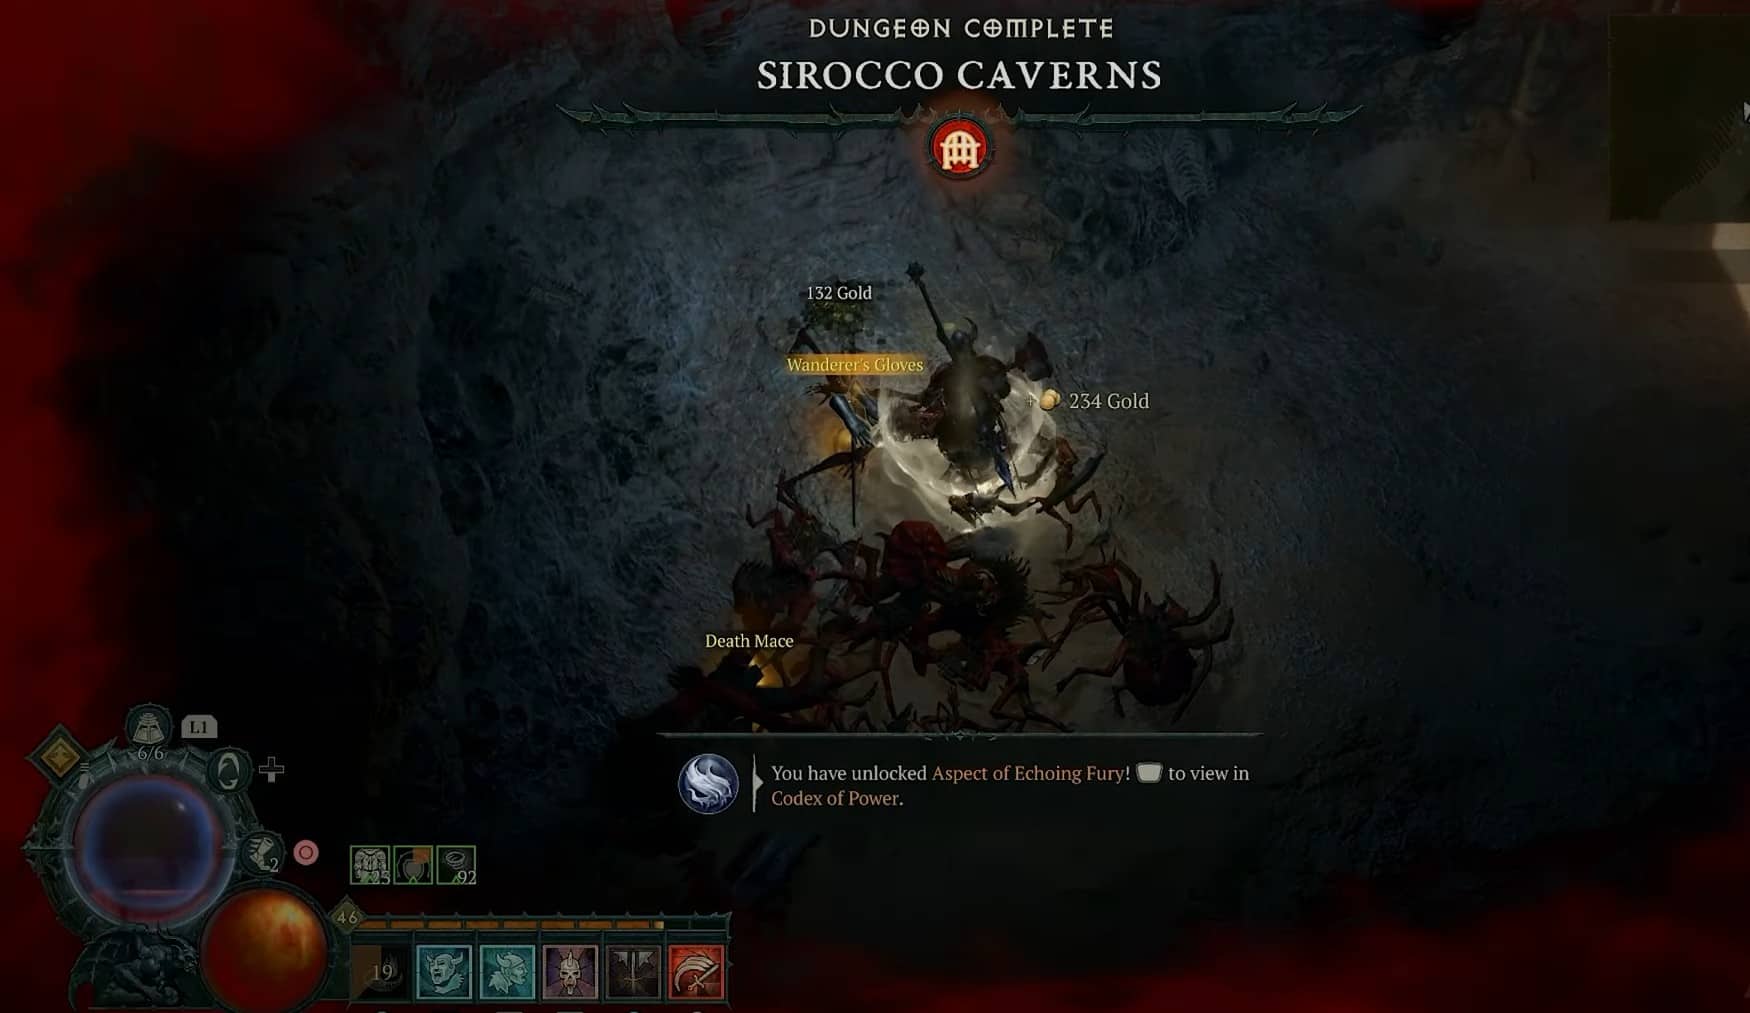 Sirocco Caverns Dungeon in Diablo 4